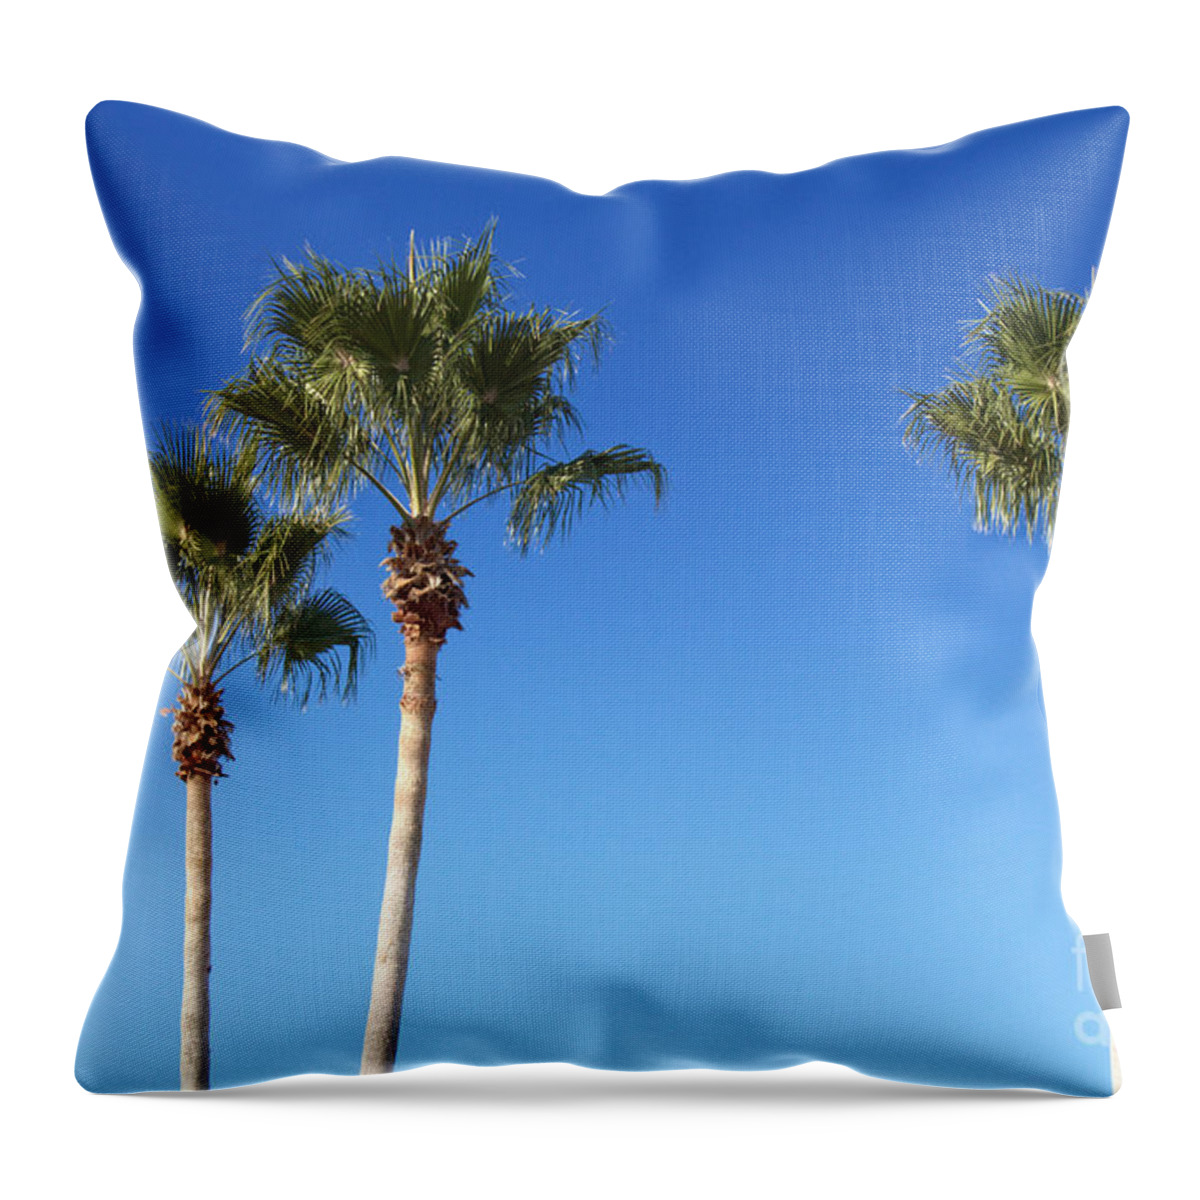 Trees Throw Pillow featuring the photograph Tropical Sky by Ella Kaye Dickey